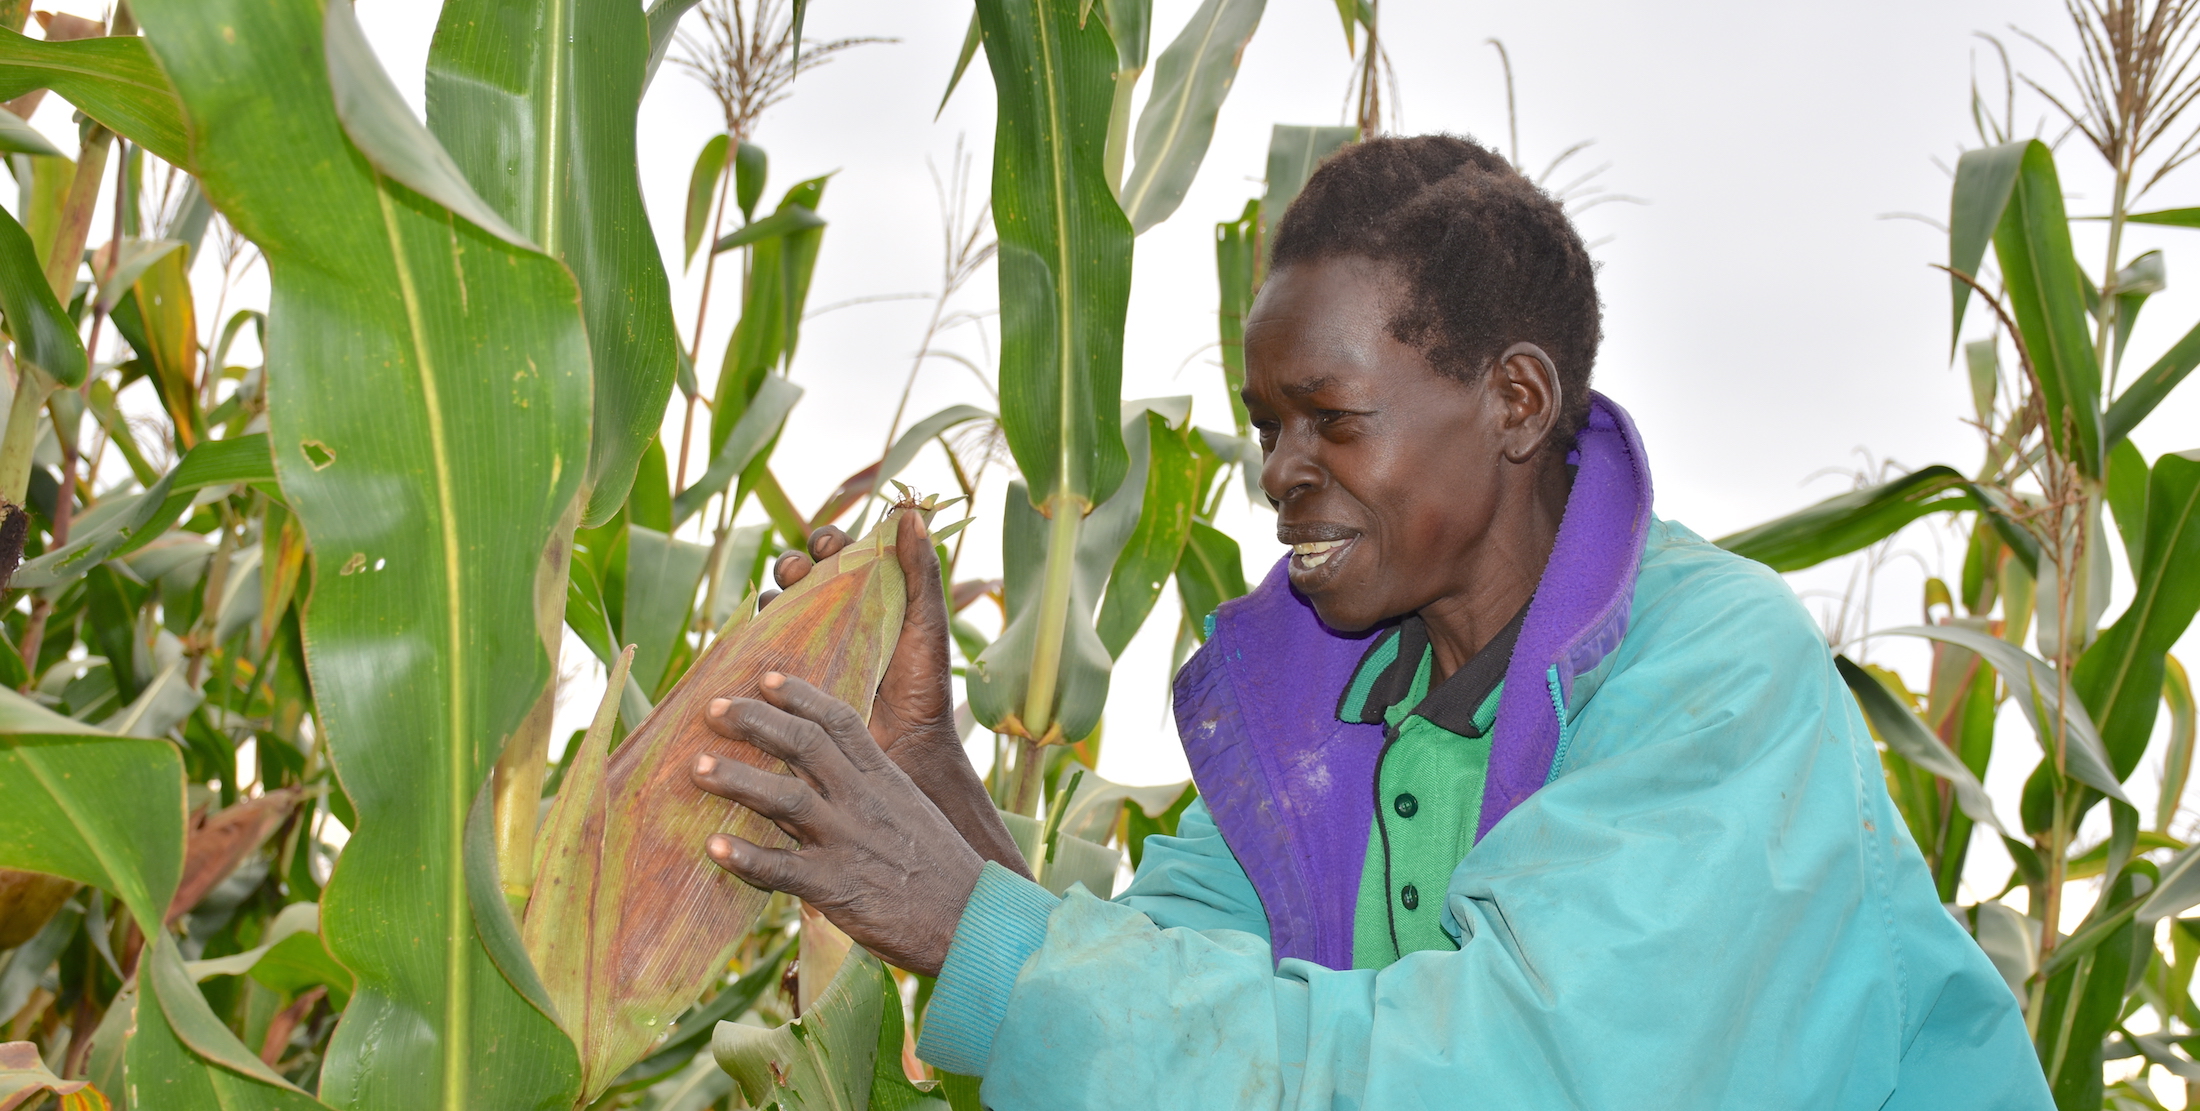 Dorine Akoth, a smallholder demo plot farmer in Gulu, northern Uganda, shows a maize plant on her plot on which she has planted several varieties that have passed through CIMMYT’s breeding pipeline. (Photo: Joshua Masinde/CIMMYT)